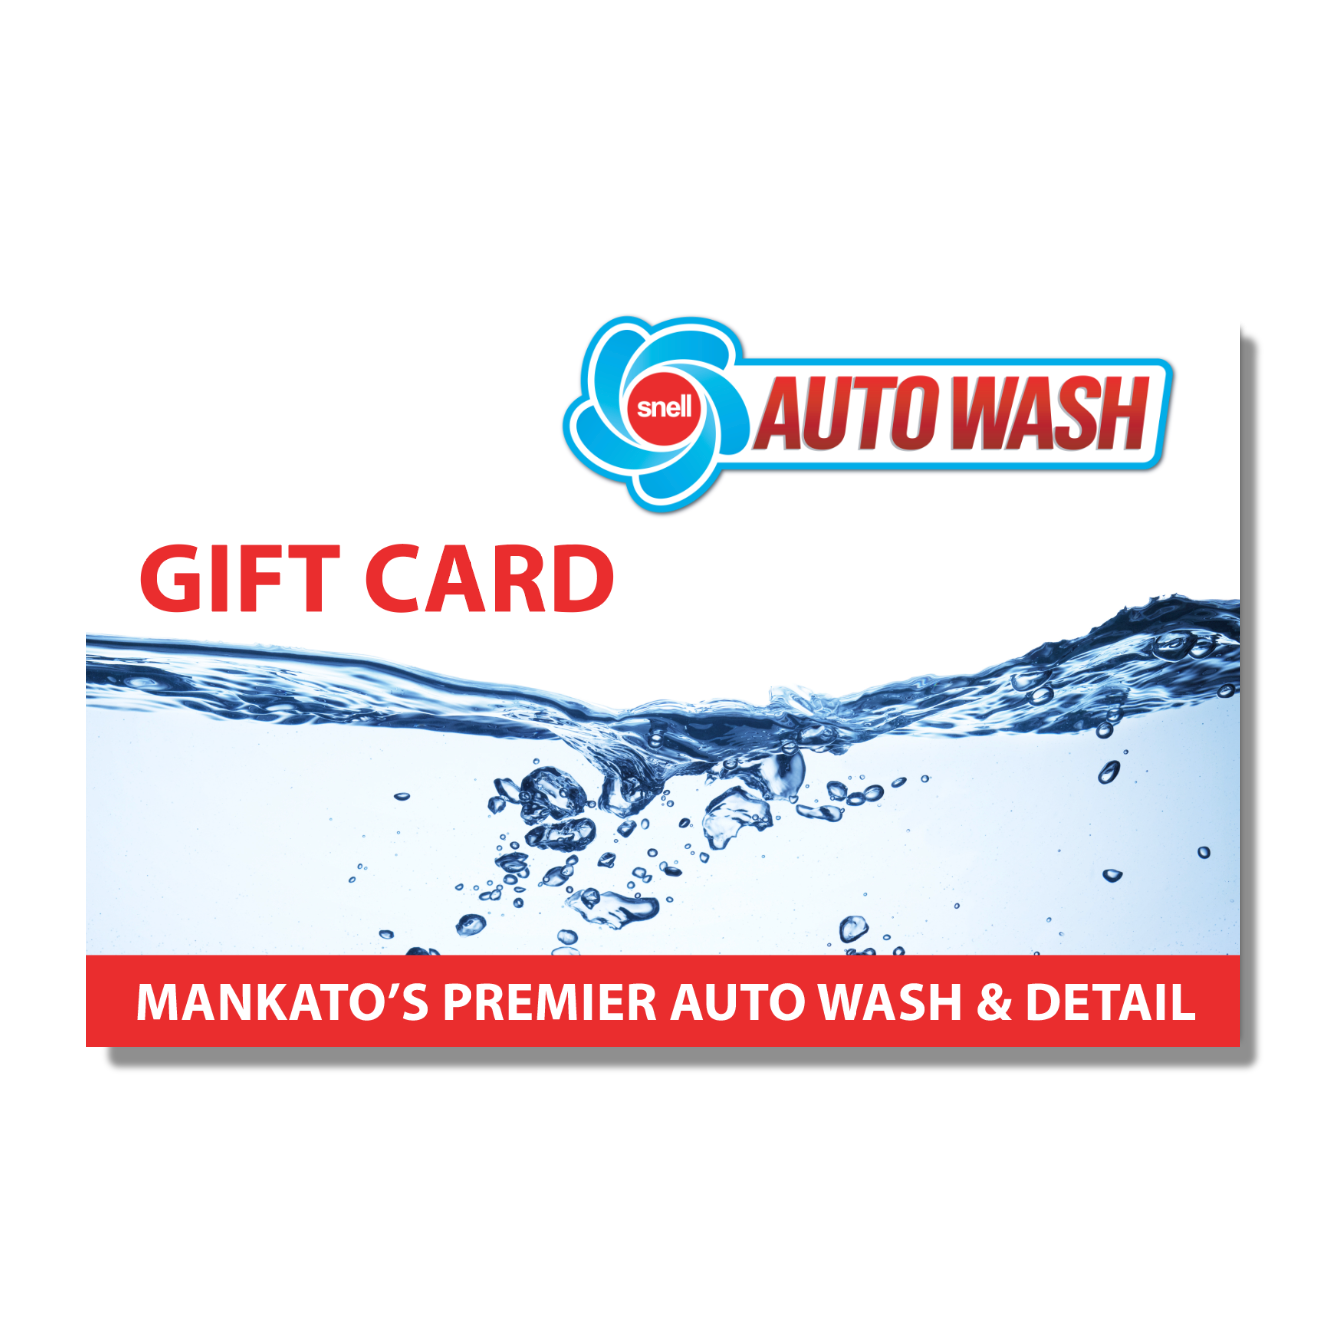 Snell Auto Wash Gift Card $100